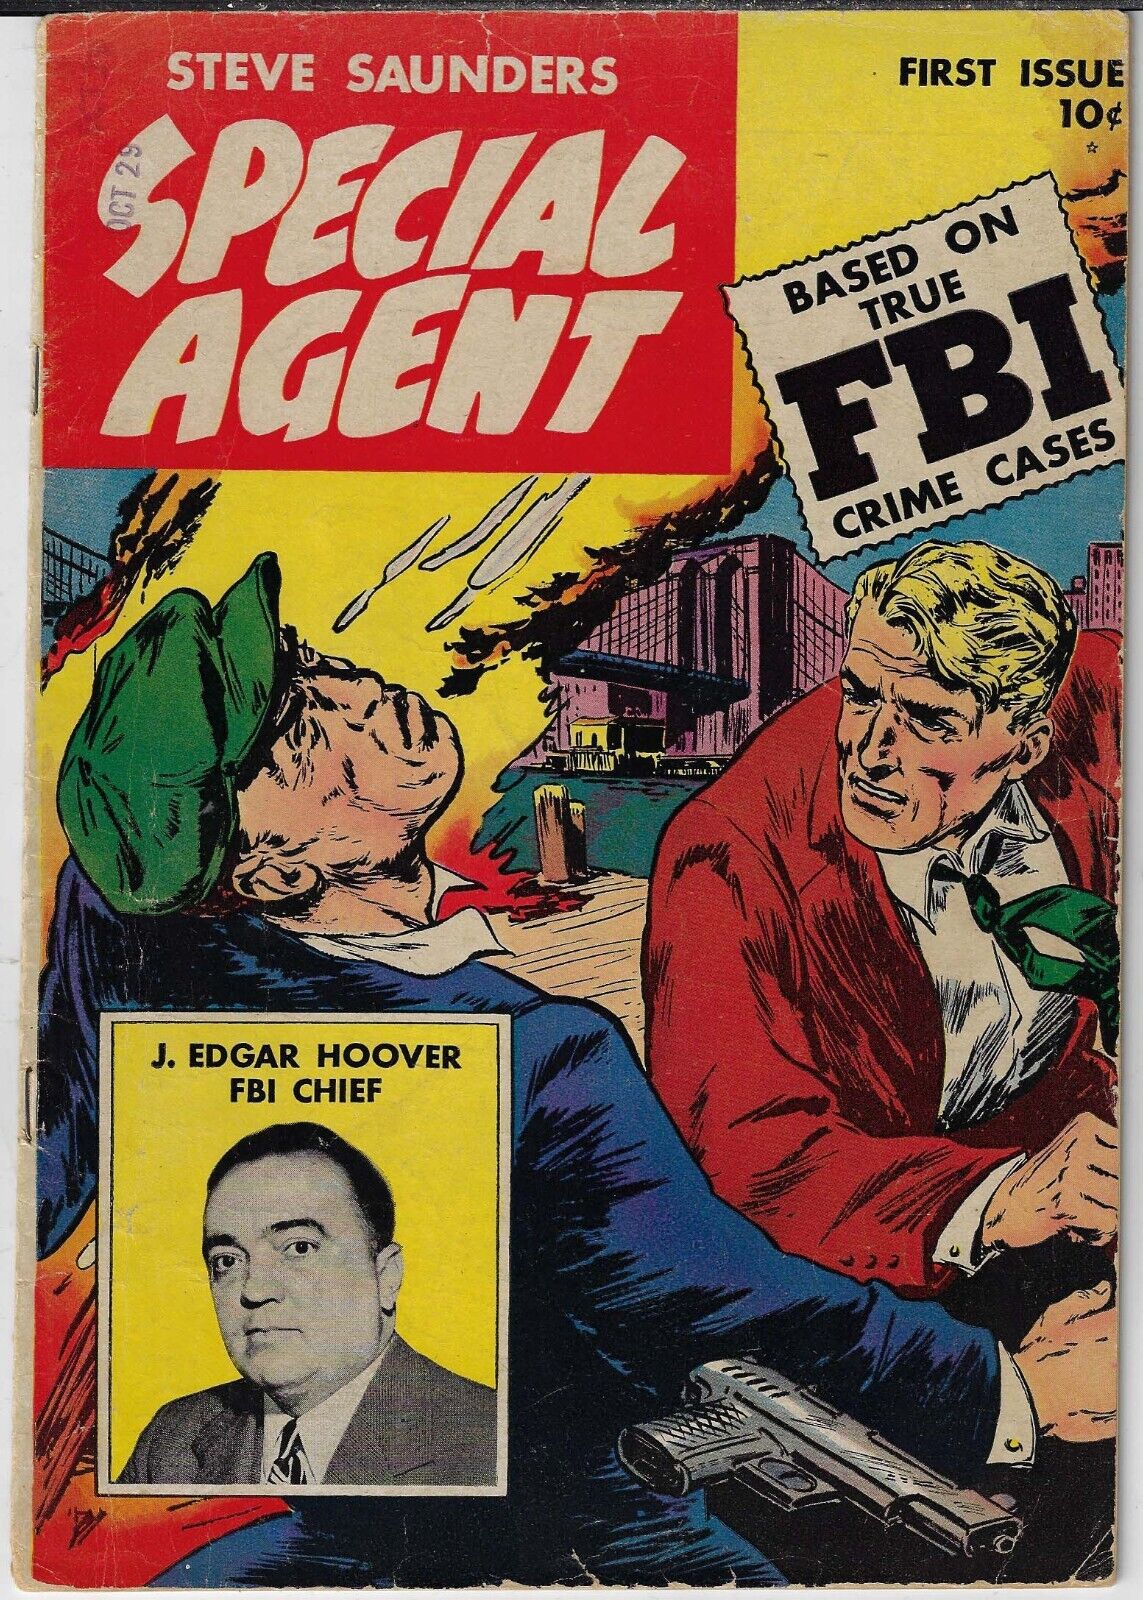 STEVE SAUNDERS SPECIAL AGENT # 1 GOOD COMICS 1947 VERY SCARCE HOOVER PHOTO COVER